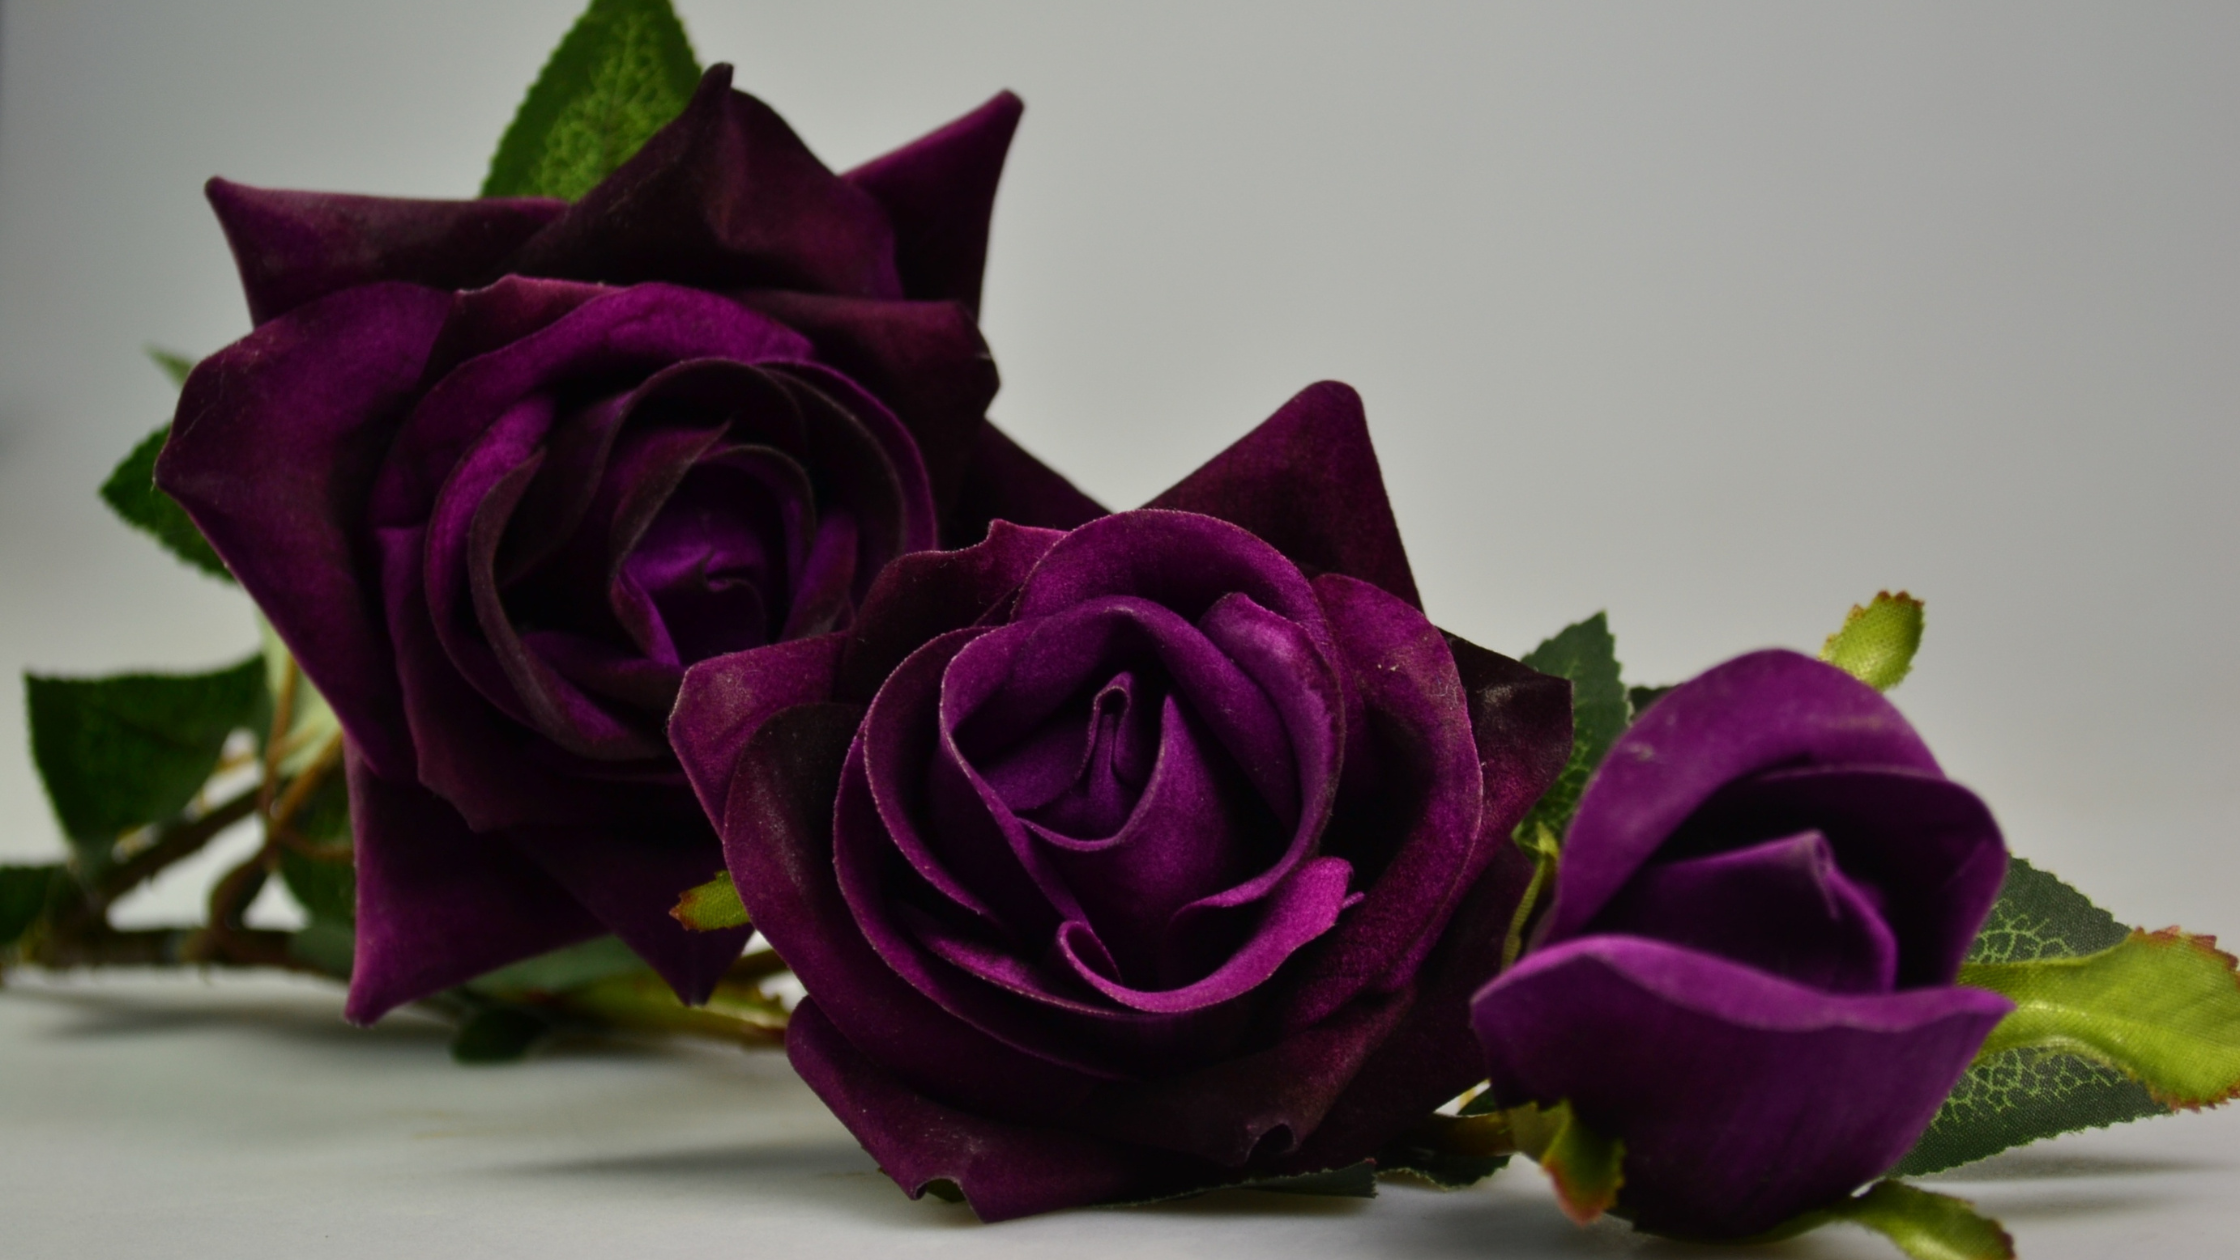 The Vibrational Power of Roses: Beauty and Energy Through the Ages